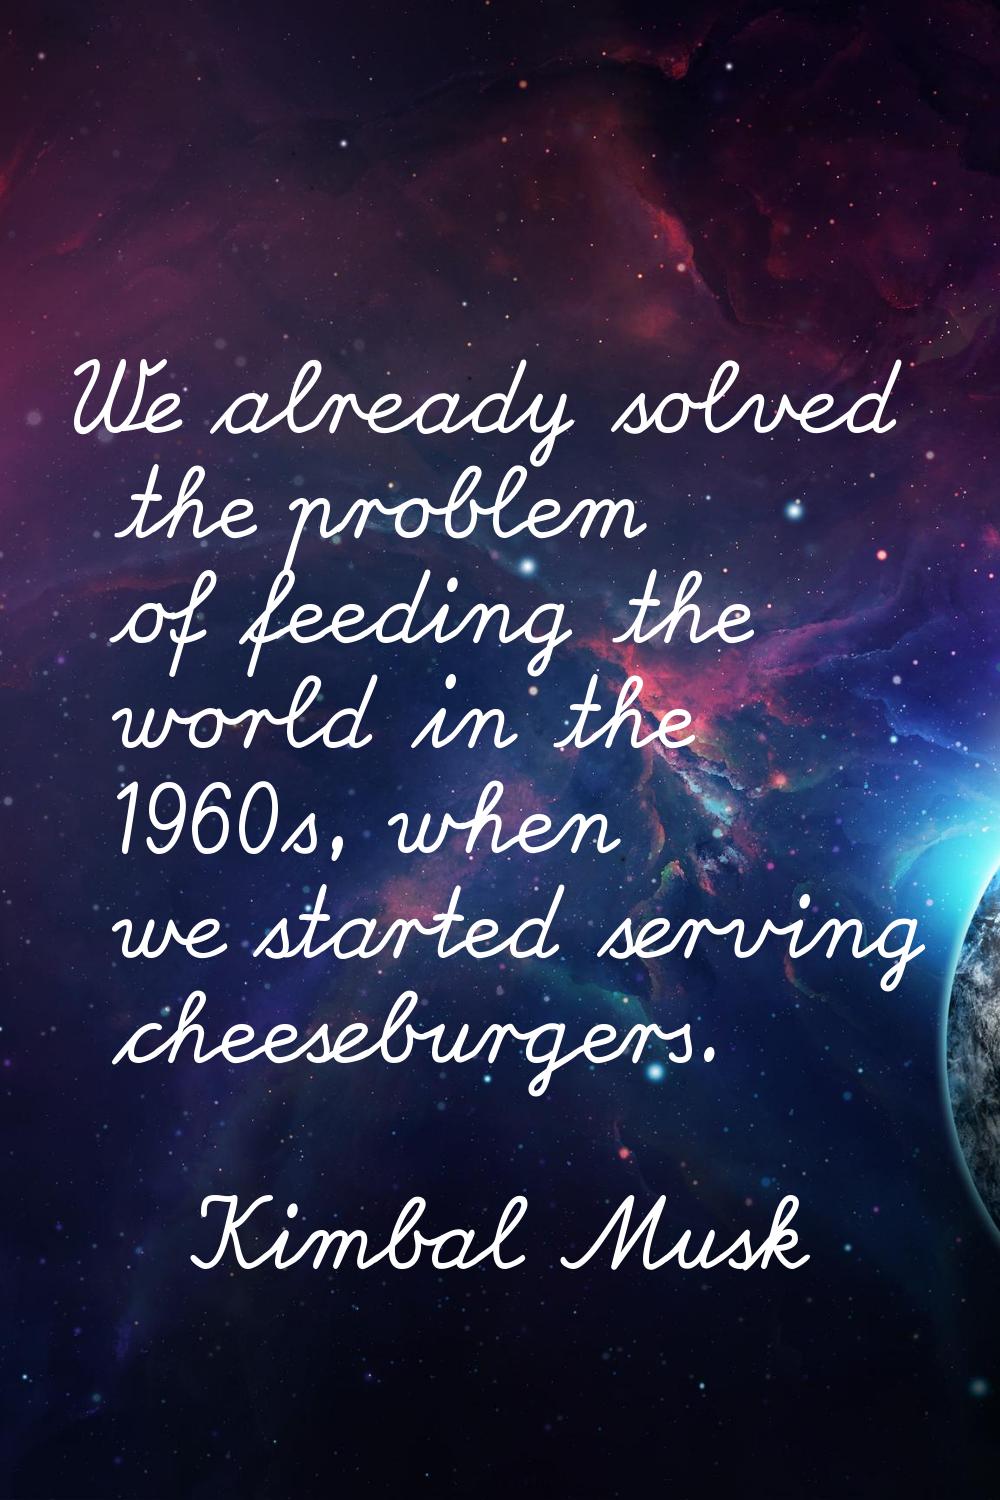 We already solved the problem of feeding the world in the 1960s, when we started serving cheeseburg